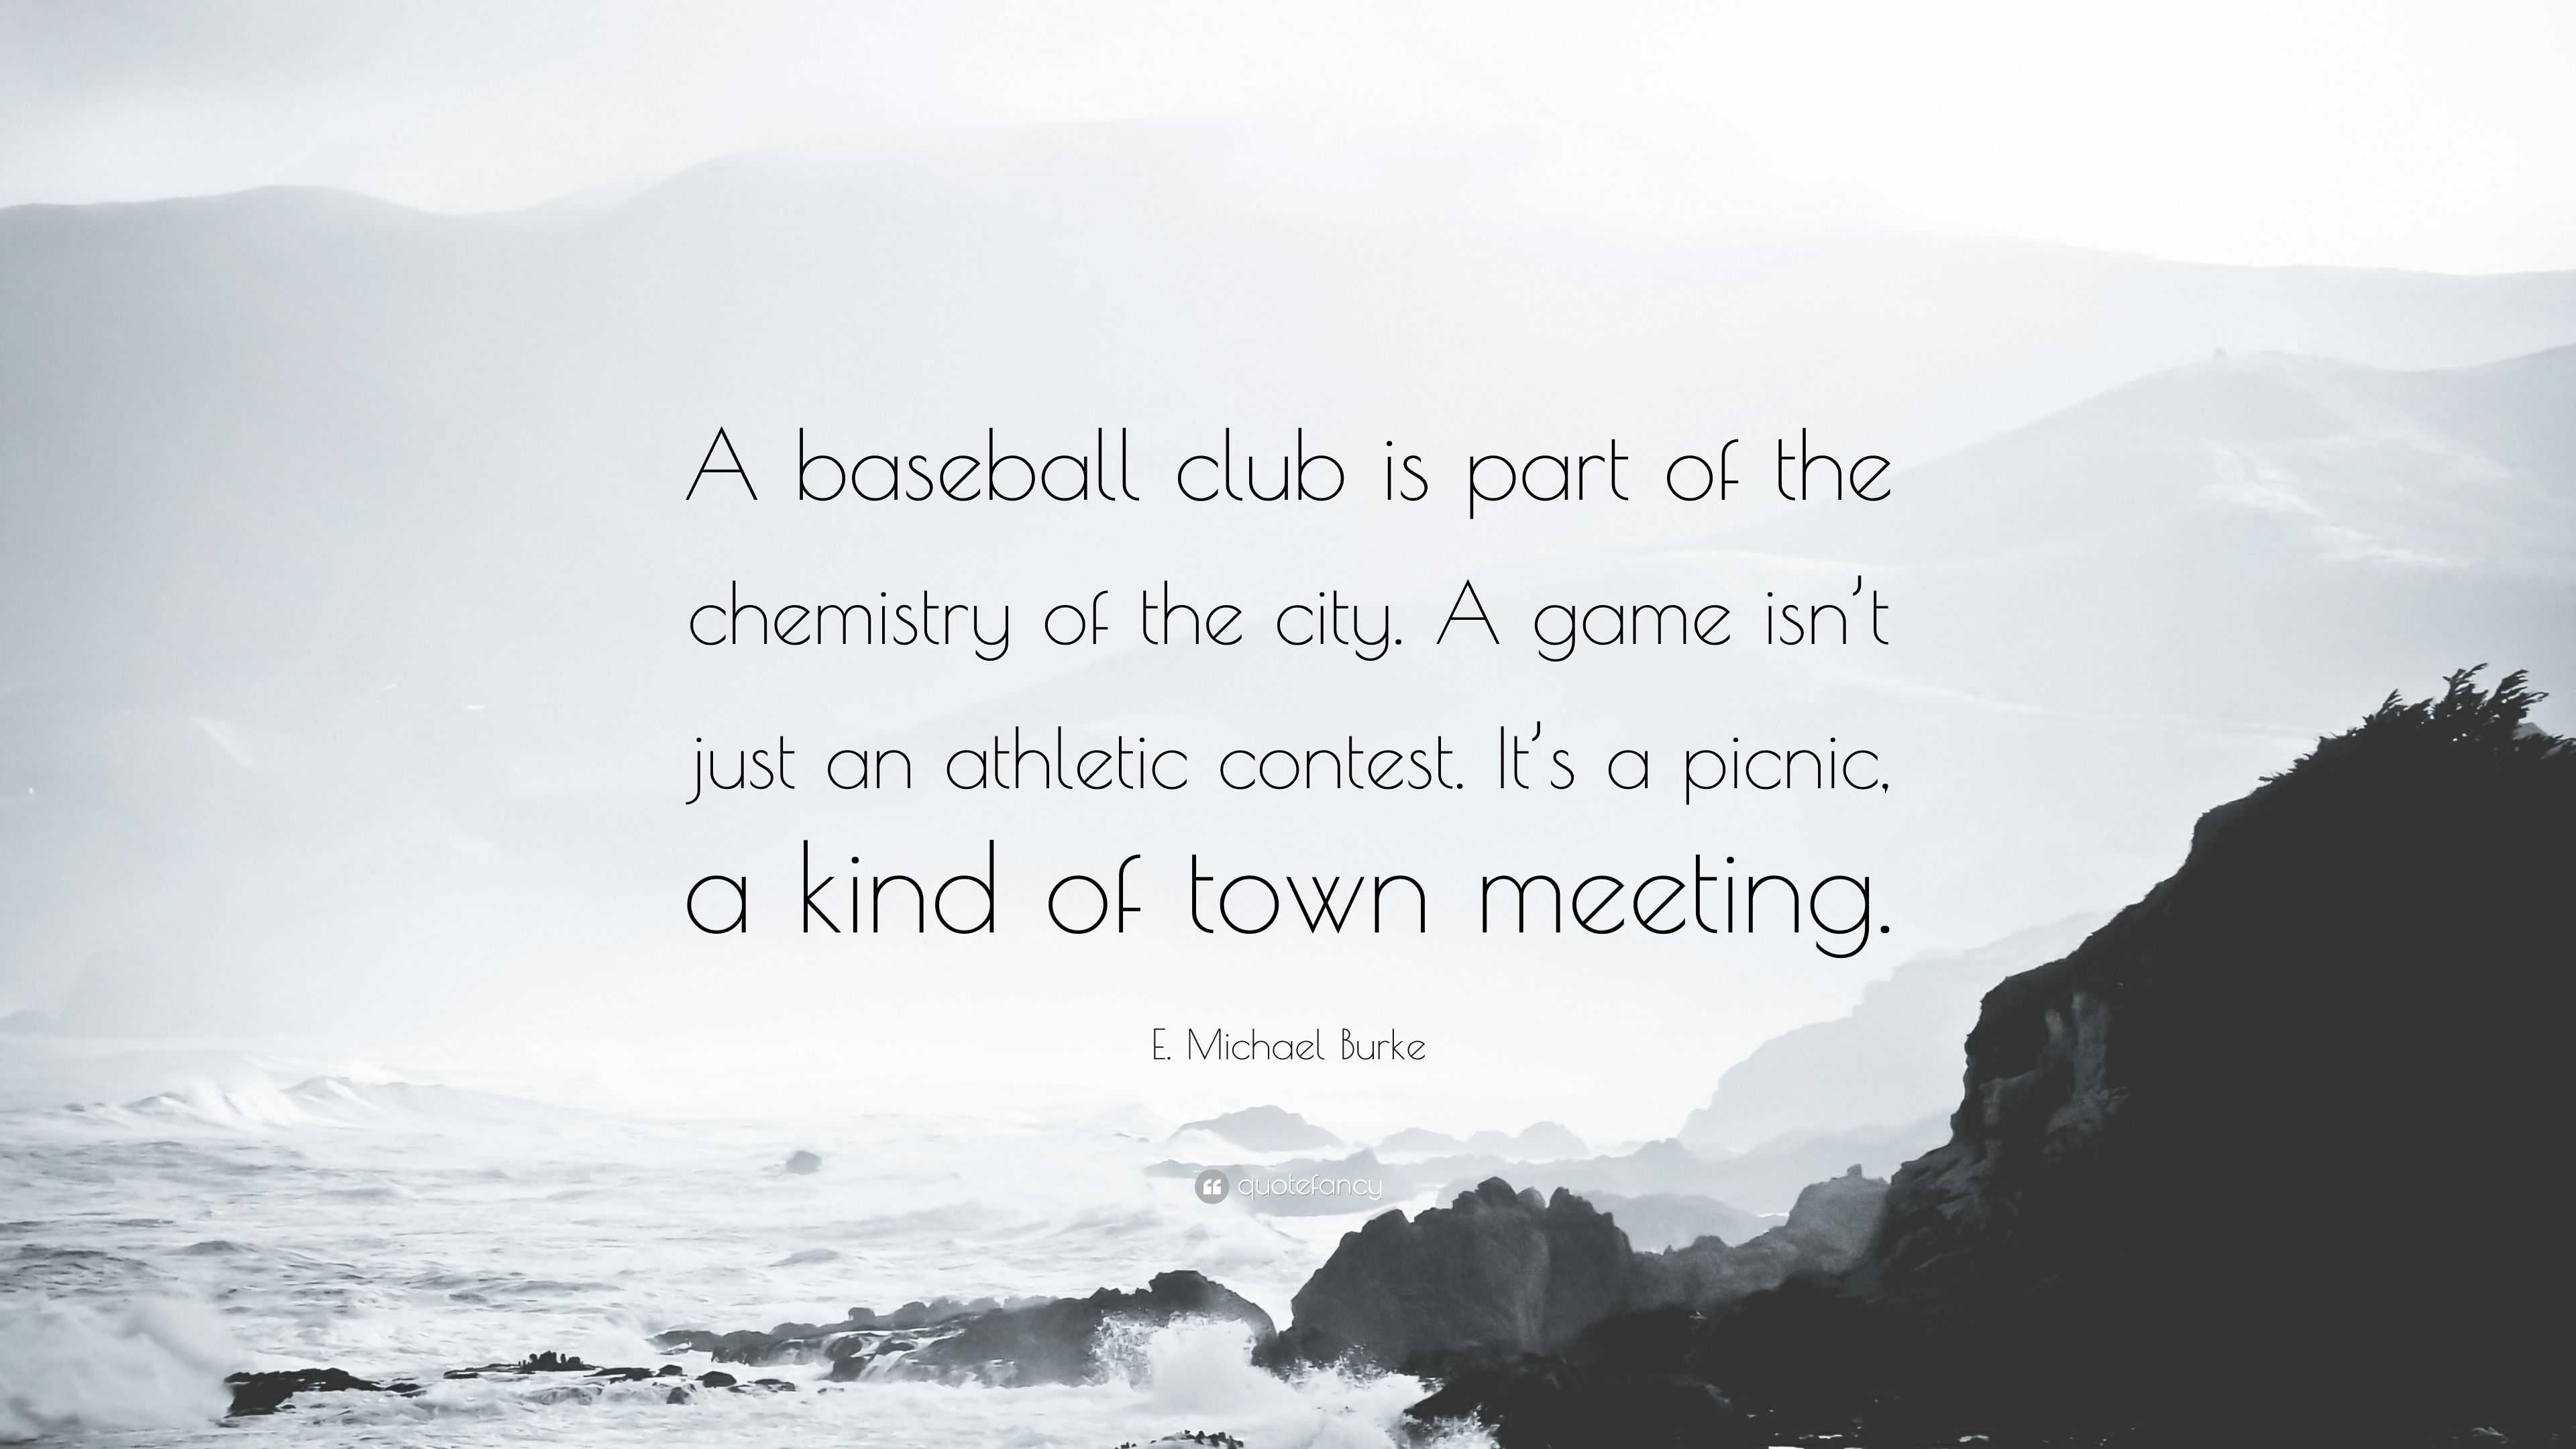 E. Michael Burke Quote: “A baseball club is part of the chemistry